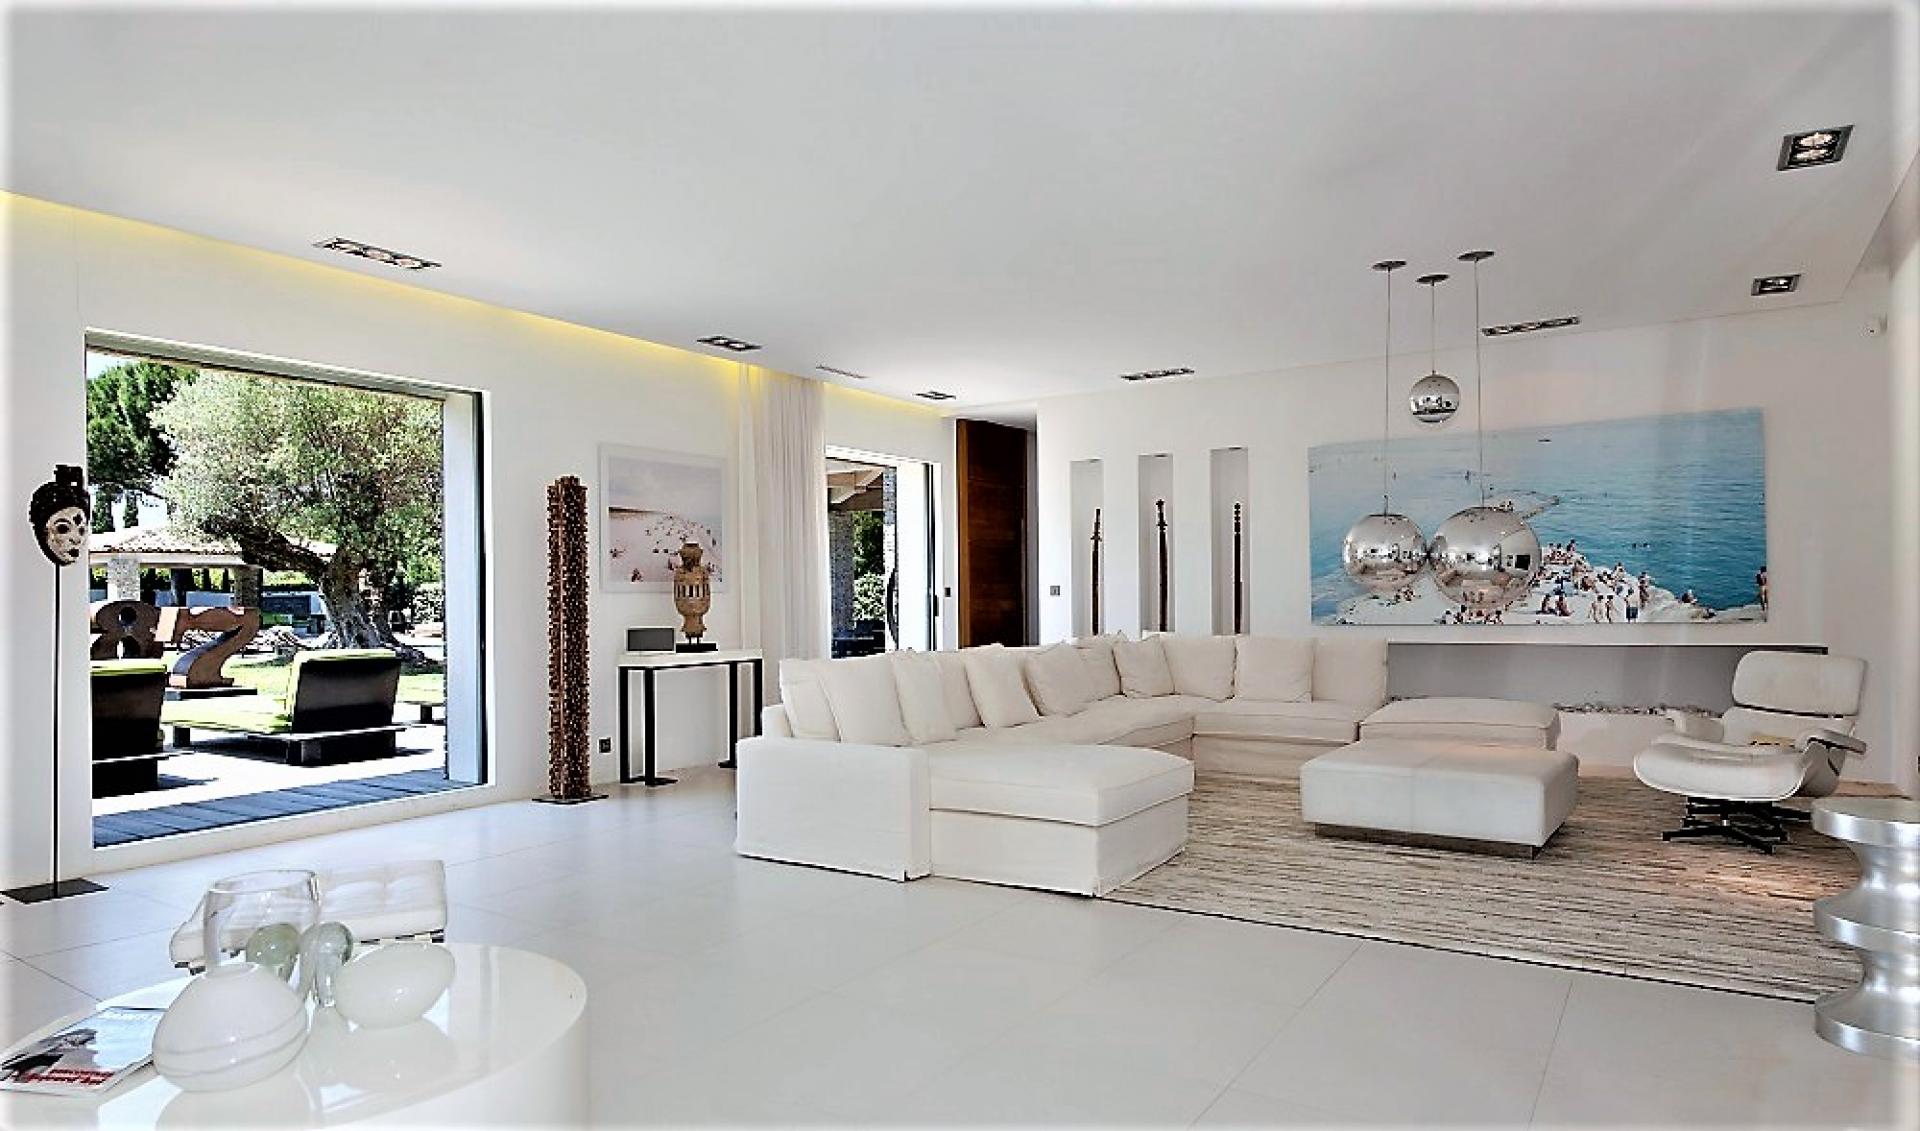 THE LOUNGE IN A BEAUTIFUL VILLA TO RENT IN ST TROPEZ